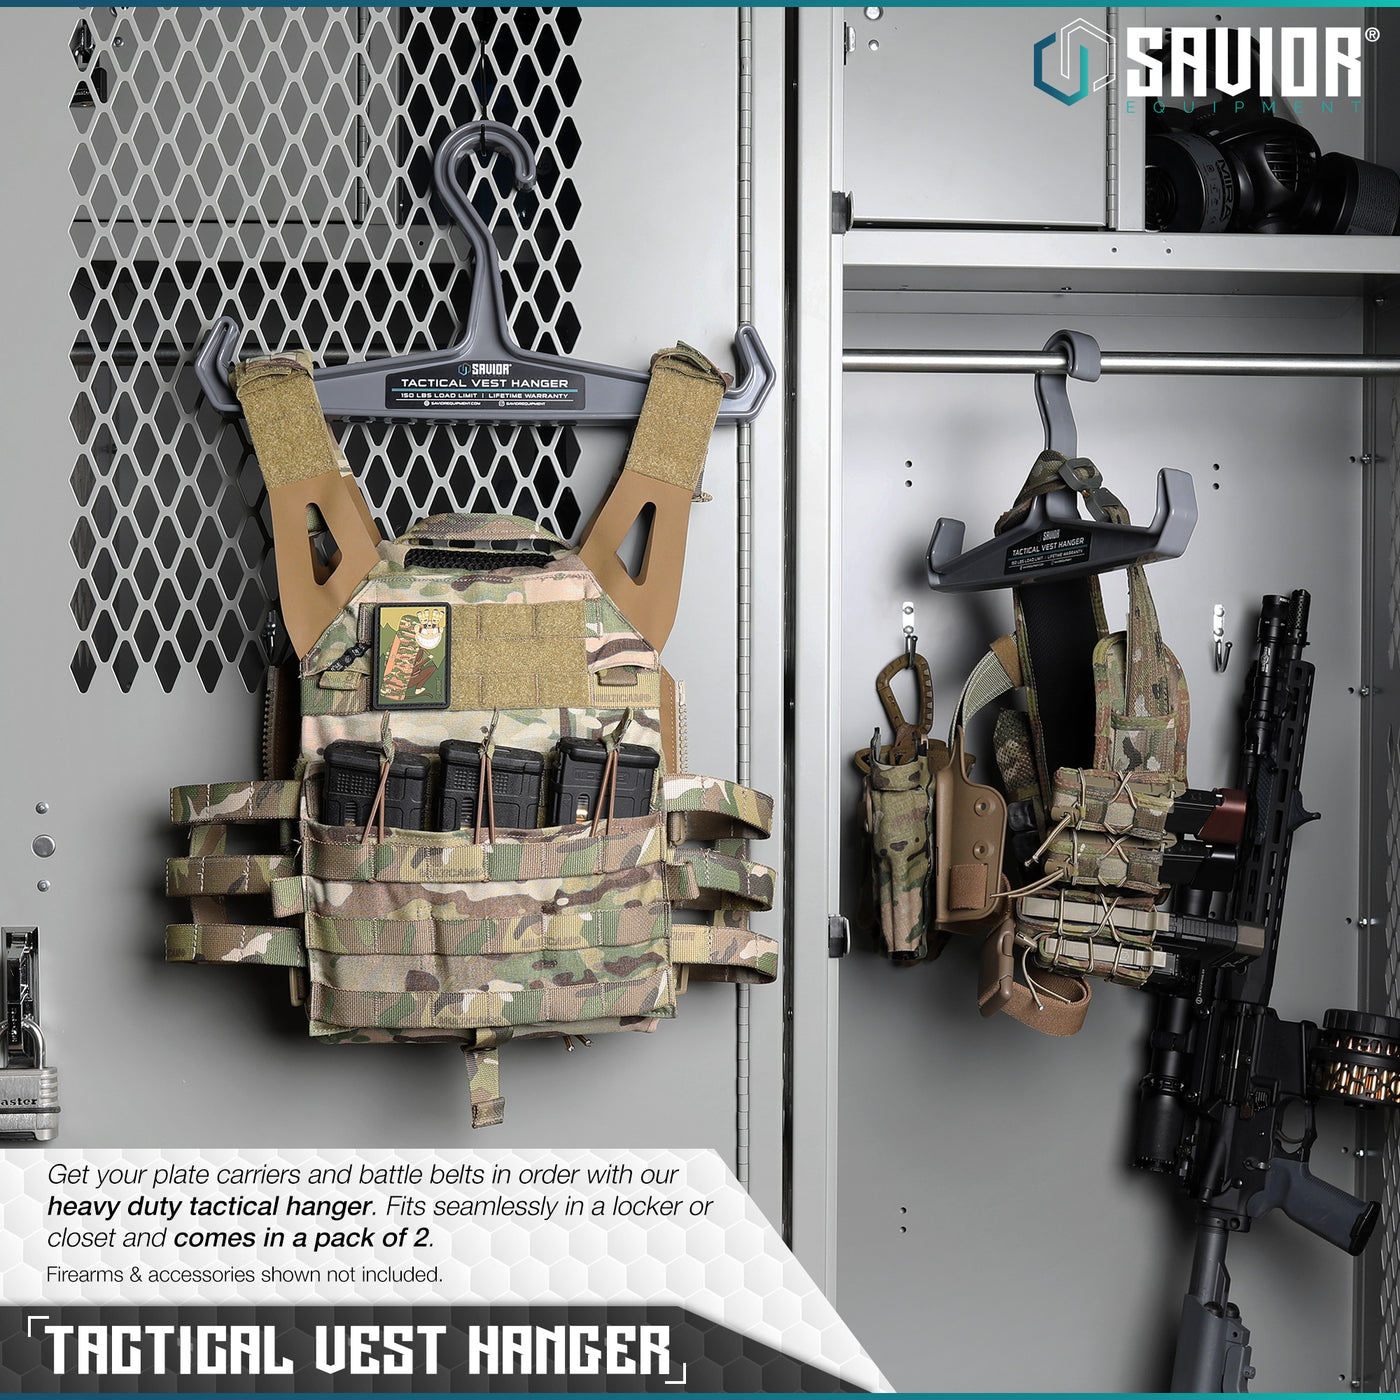 Tactical Vest Hanger - Get your plate carriers and battle belts in order with our heavy duty hanger. Fits seamlessly in a locker or closet and comes in a pack of 2. Firearms & accessories shown not included.